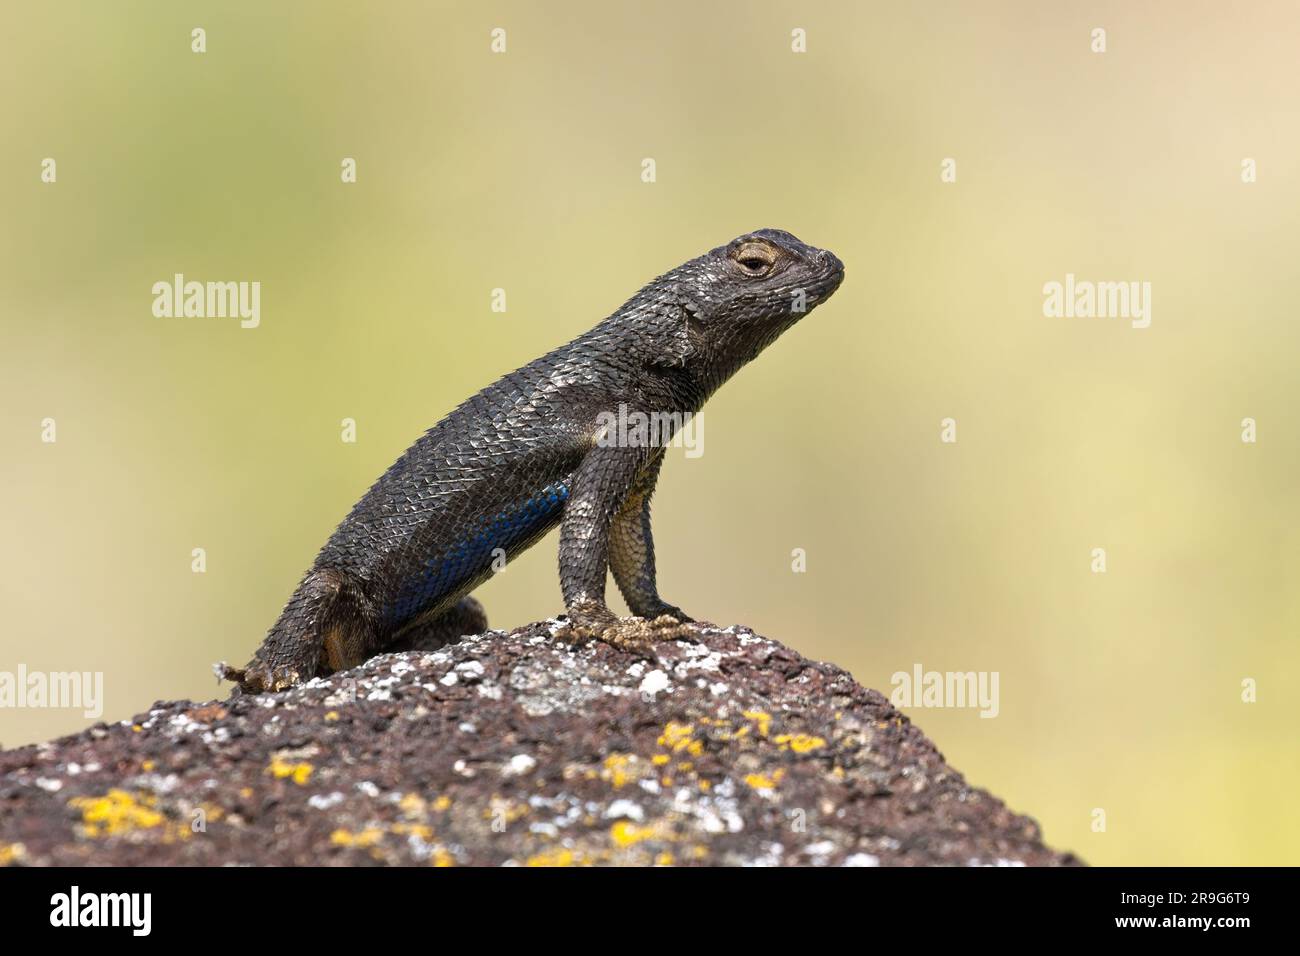 A close up photo of a small lizard standing up on its front legs on a small rock near Hagerman, Idaho. Stock Photo